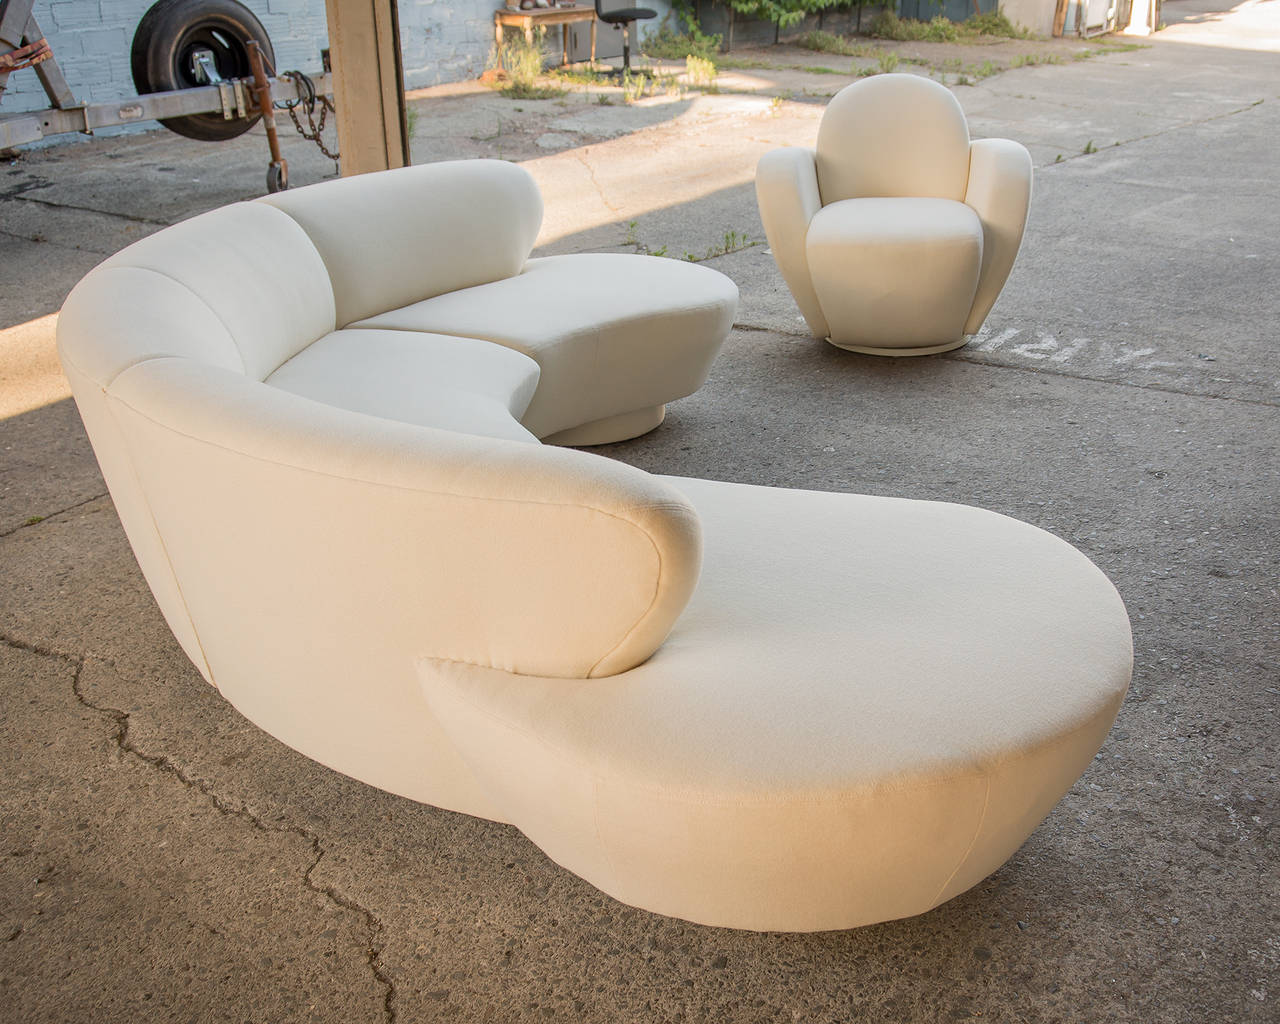 Curvaceous kidney shaped sofa with matching swivel lounge chair by Vladimir Kagan for Directional, circa 1985.
Flowing lines and deep cushions offer decadent comfort and visual exuberance as only a Kagan design can...
Sofa sections easily come